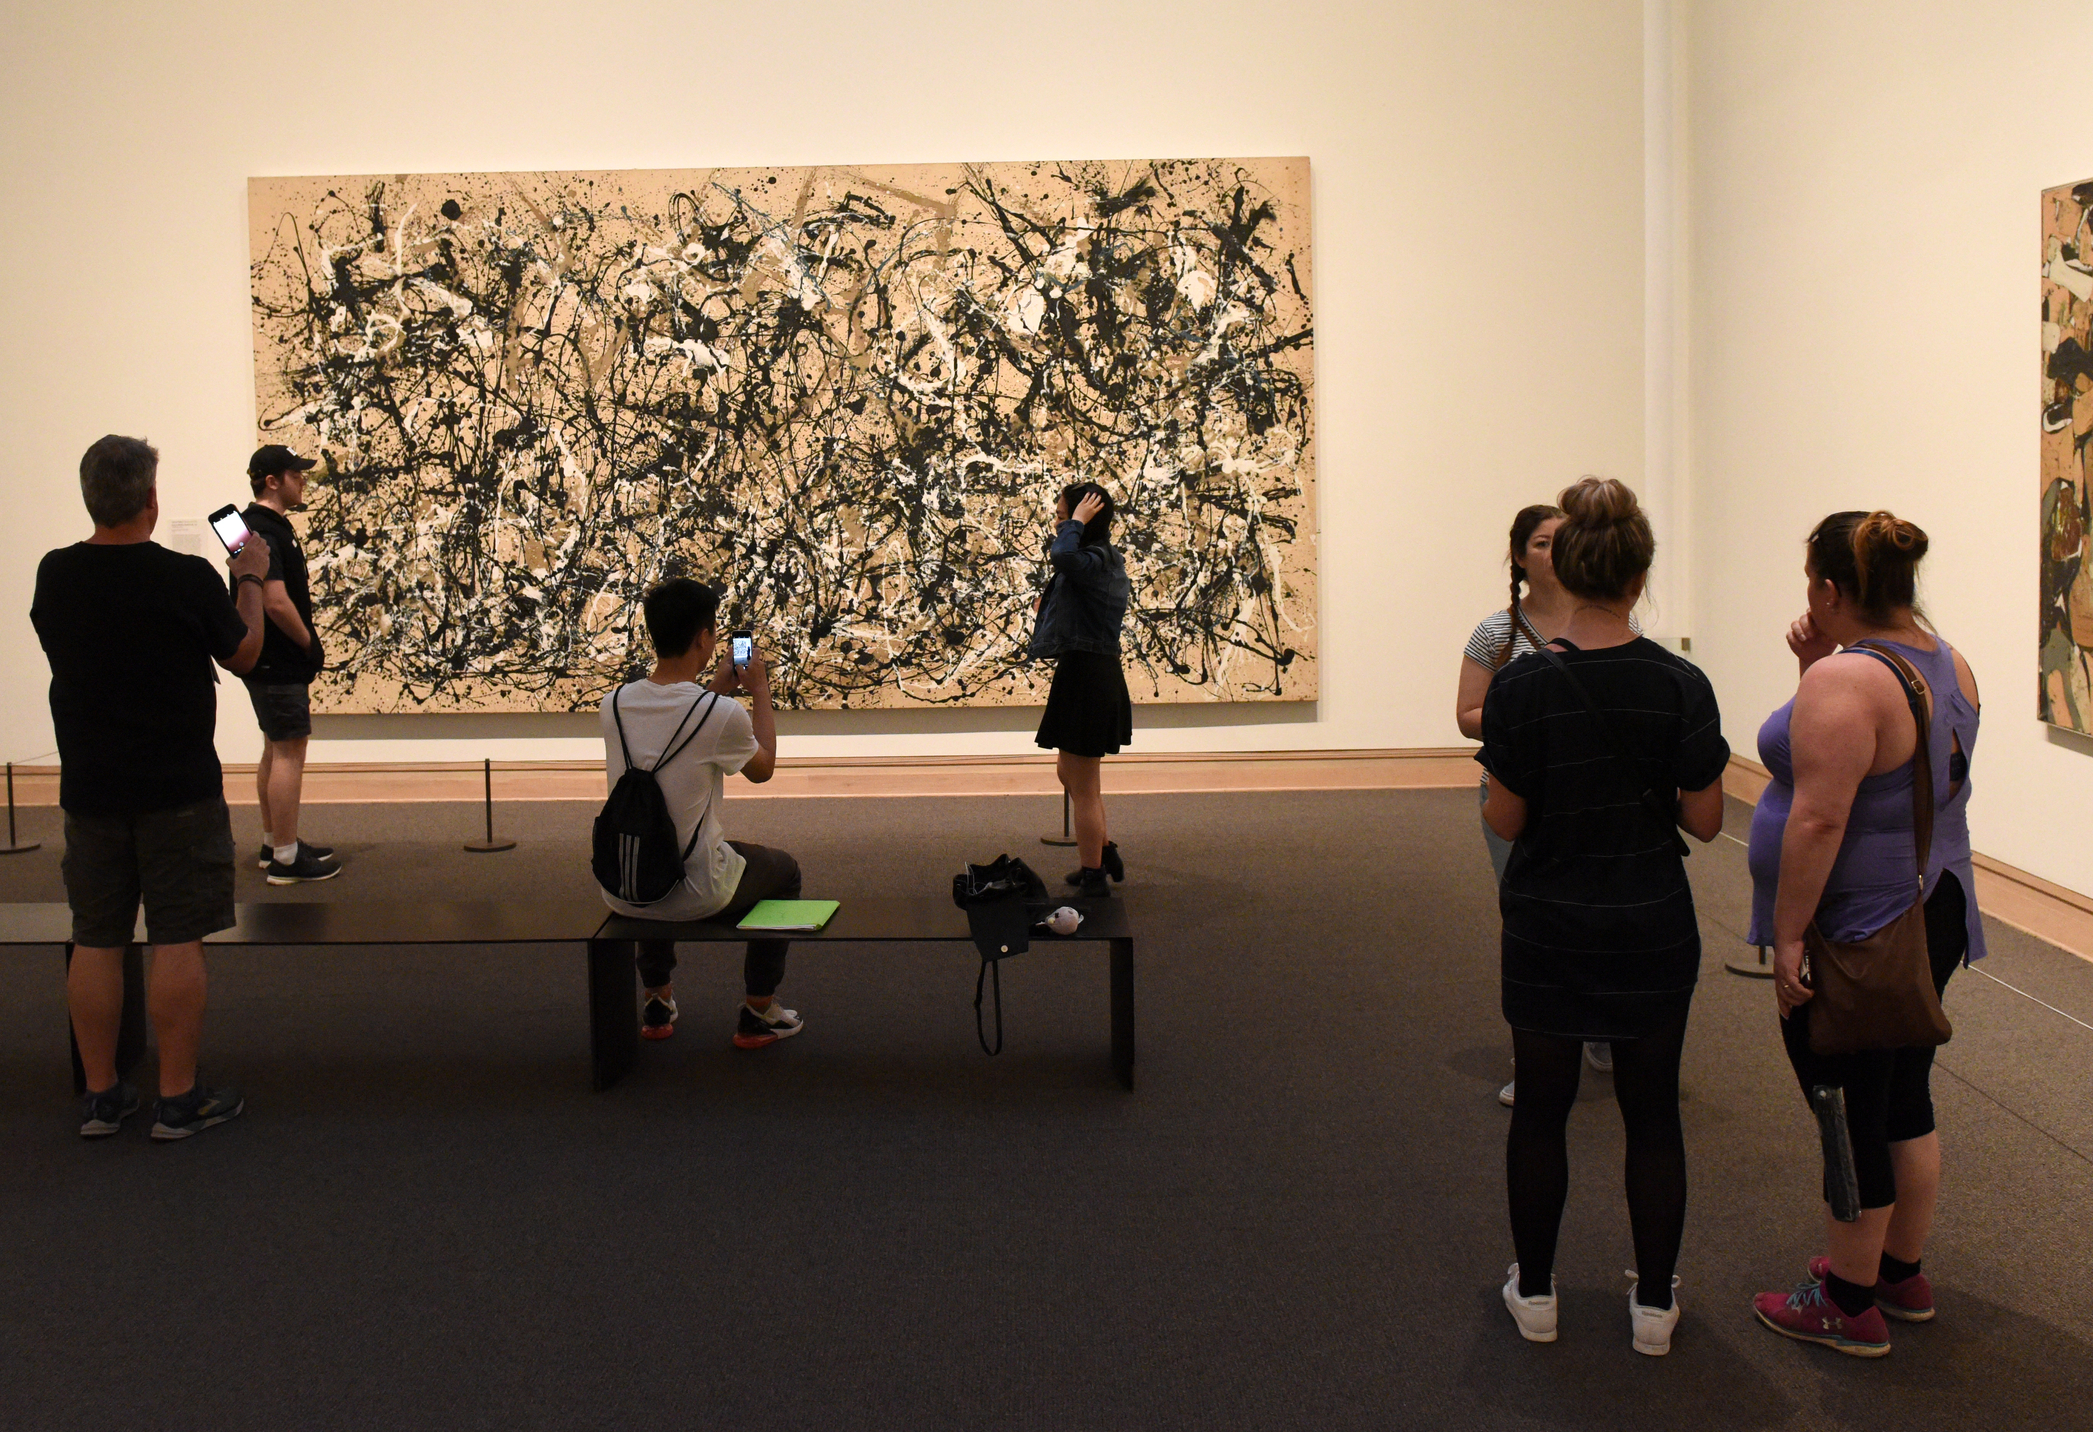 Children looking at a Jackson Pollock painting at the Met Museum, NYC